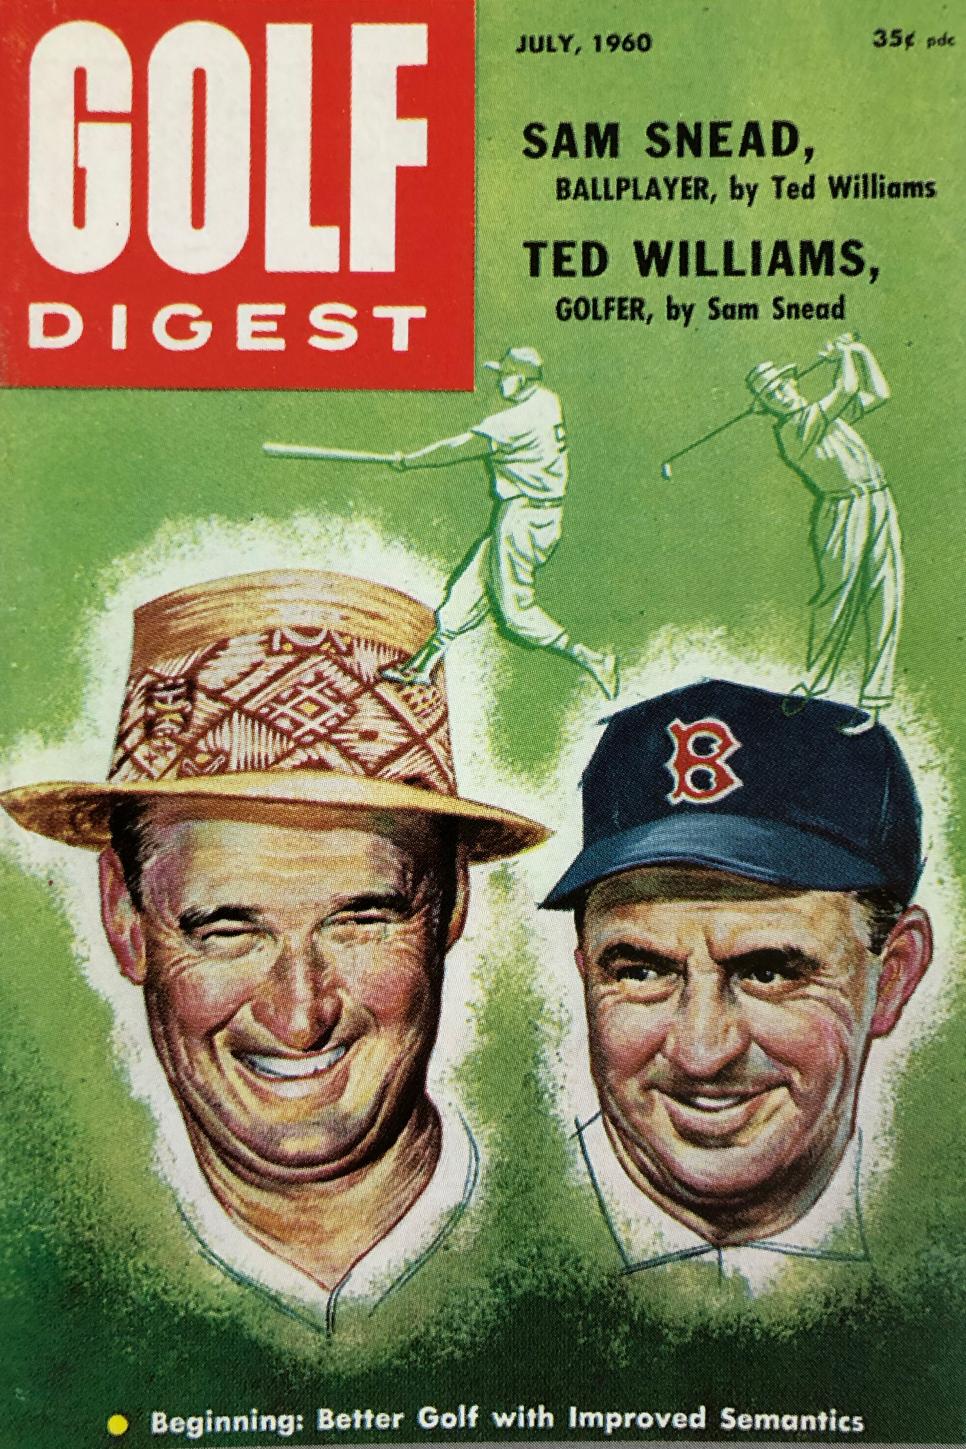 /content/dam/images/golfdigest/fullset/2020/05/Ted-Williams-Sam-Snead-cover-cropped.jpg